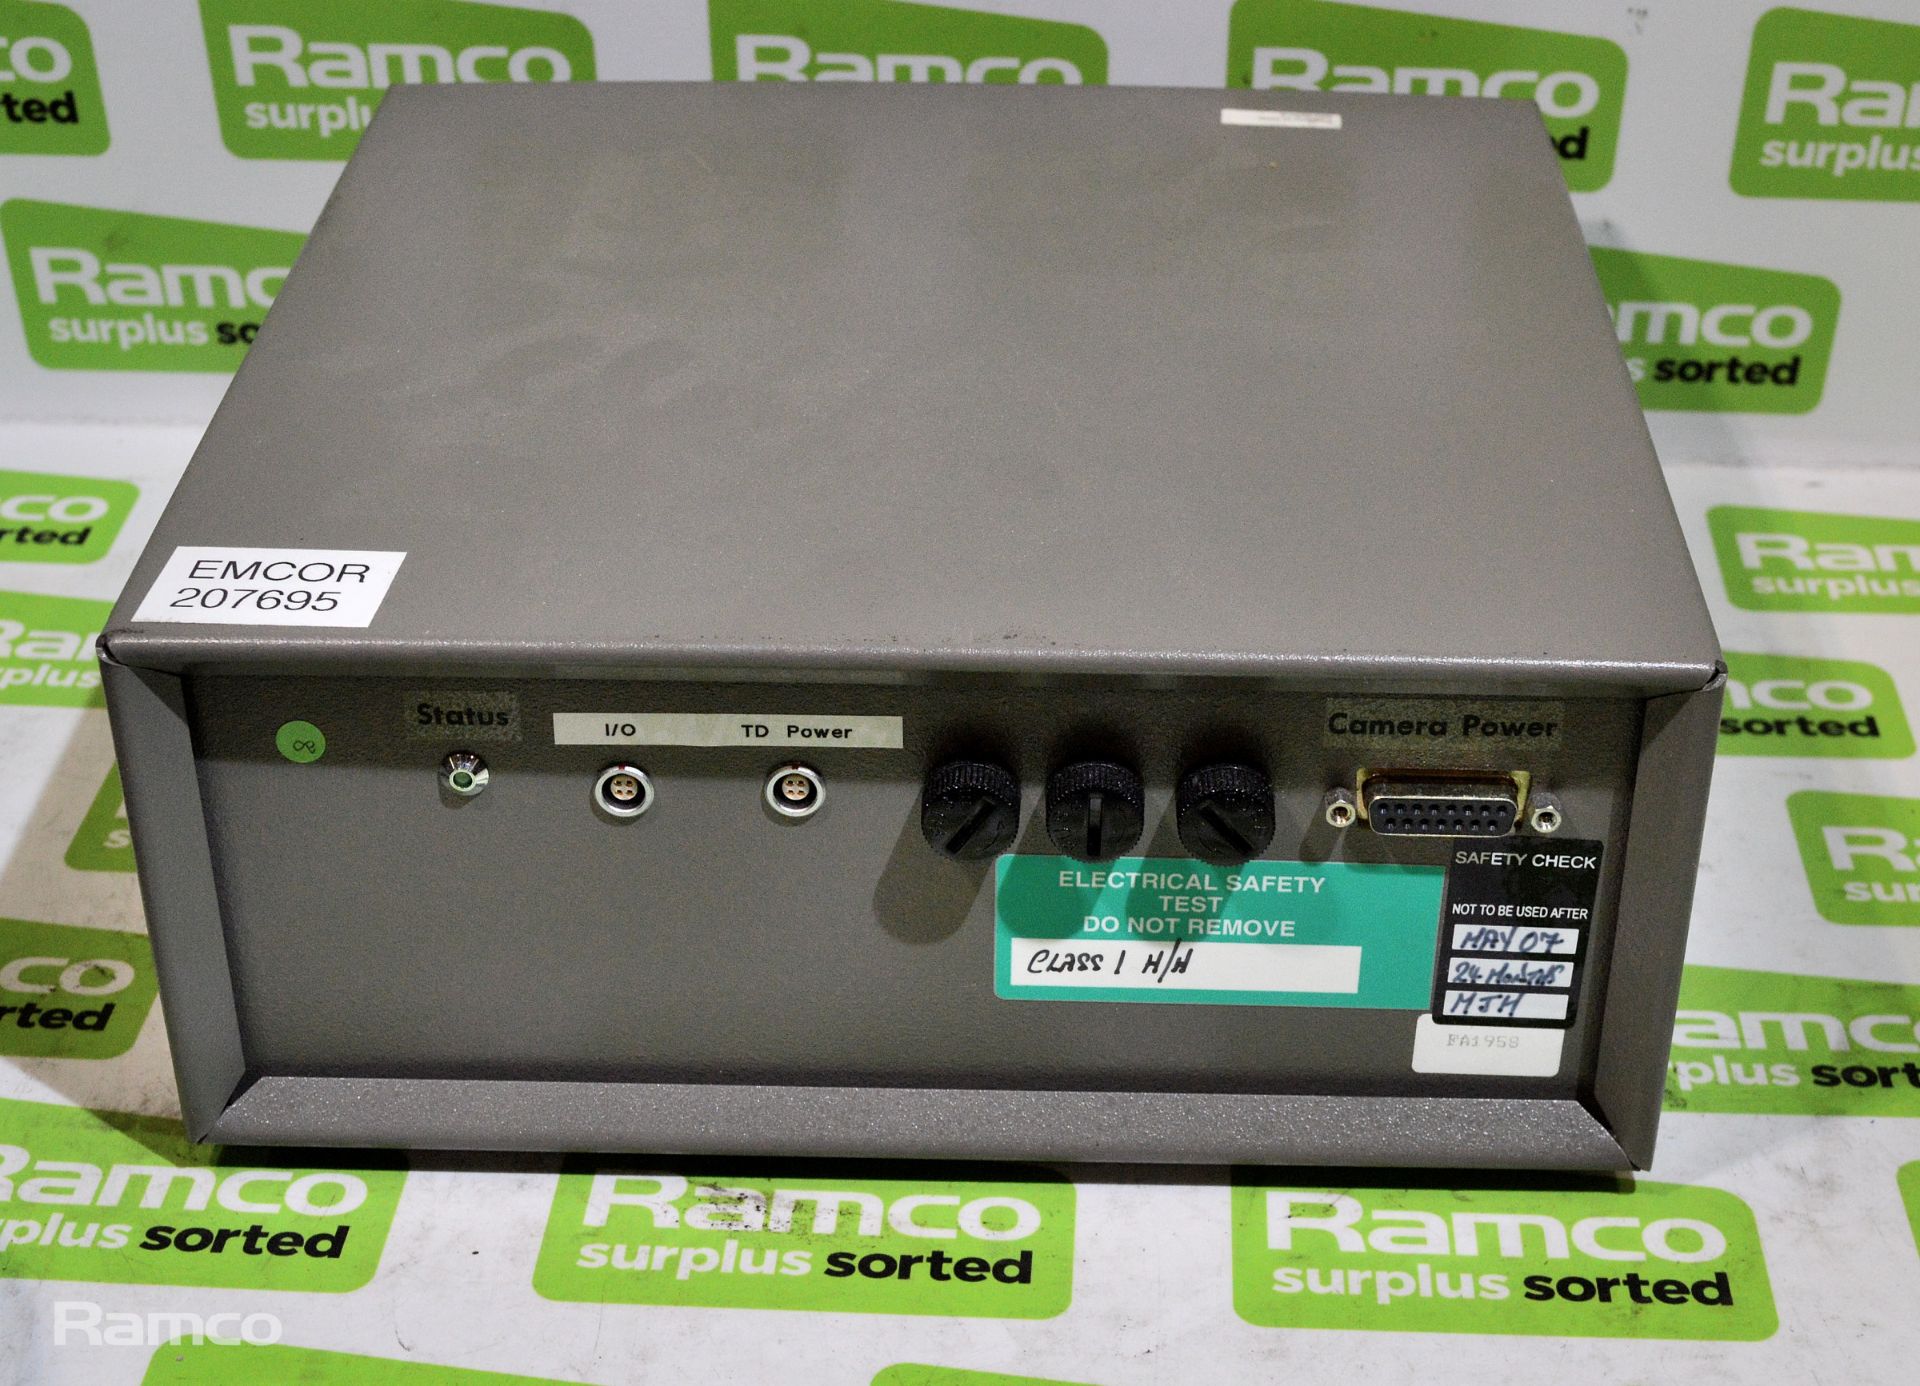 Dalsa camera power supply unit (PSU) with cables 25x25x10 - Image 3 of 4